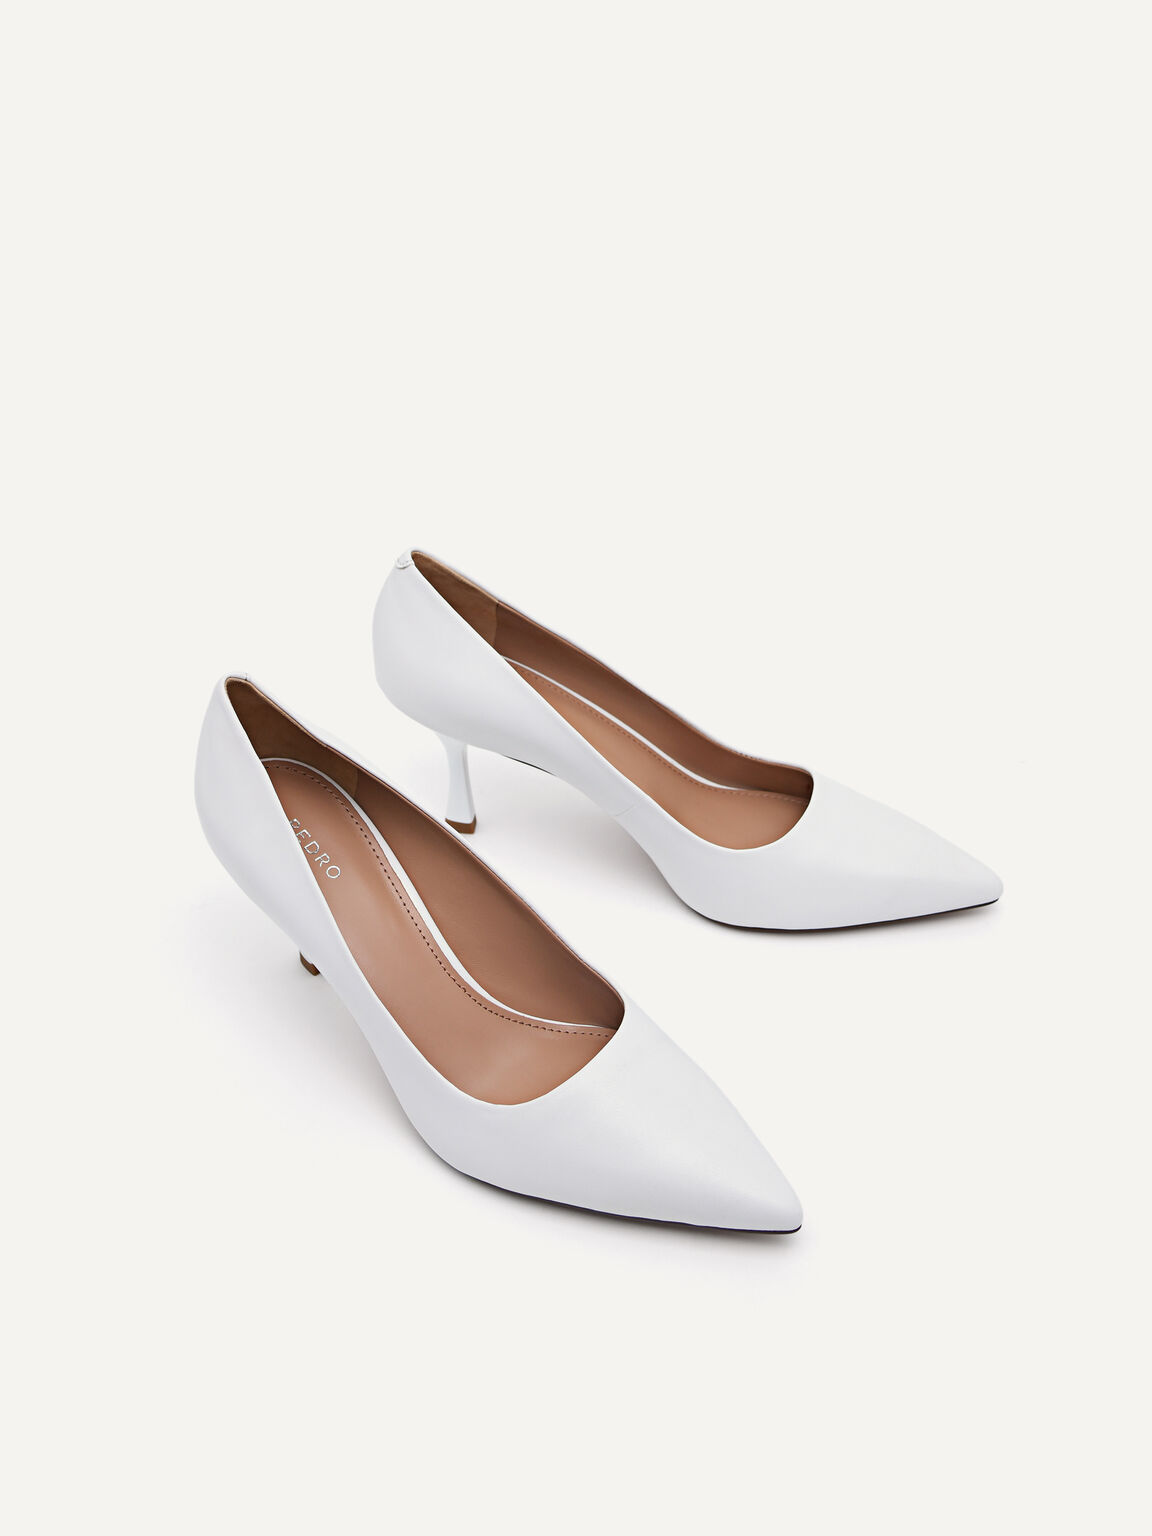 Pointed Leather Heeled Pumps, White, hi-res